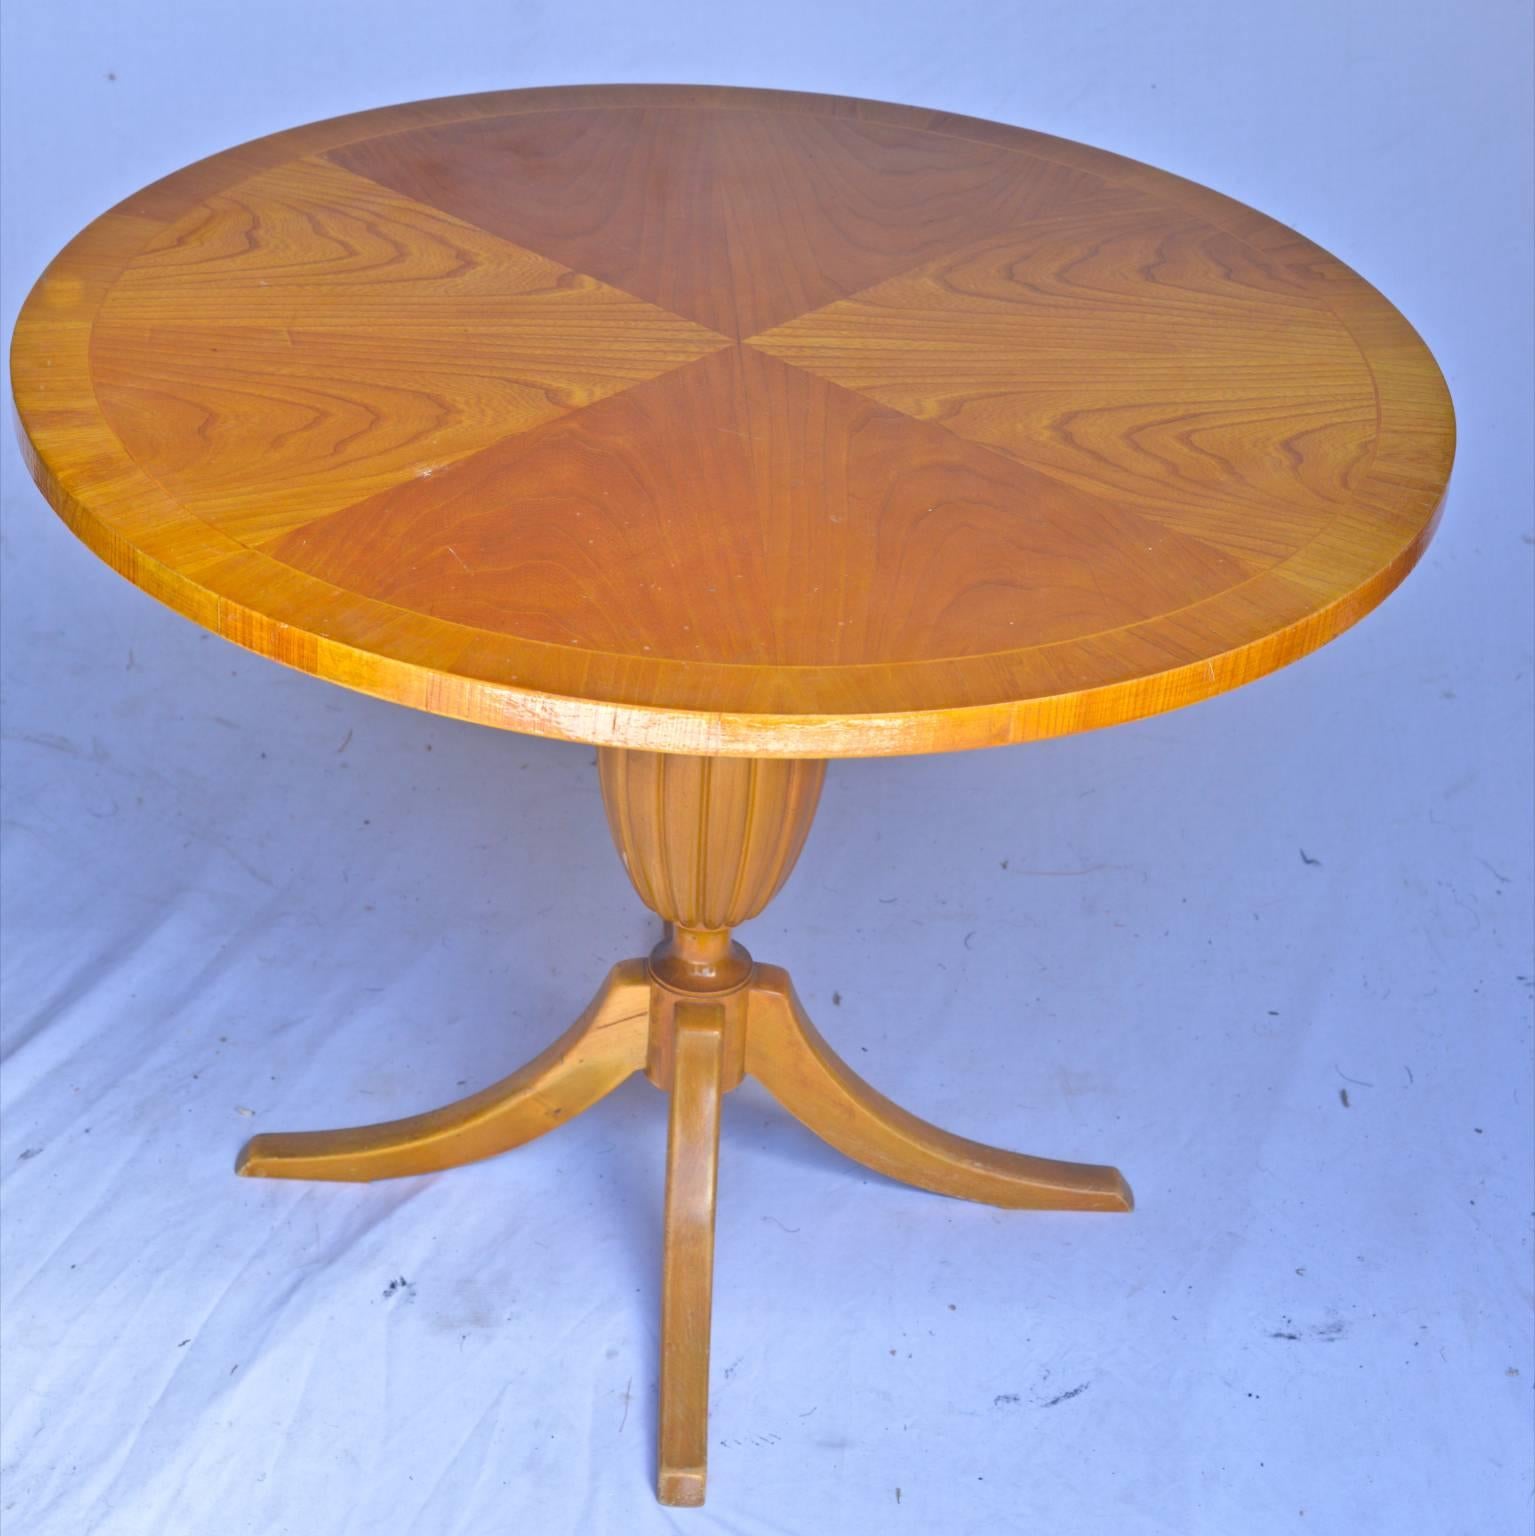 Unusual antique Swedish Biedermeier circular occasional table in stunning tiger stripe and golden birch veneers and four elegant slim curved feet.

The pedestal column in particular features an acorn shape motif.

Lovely honey color French polish